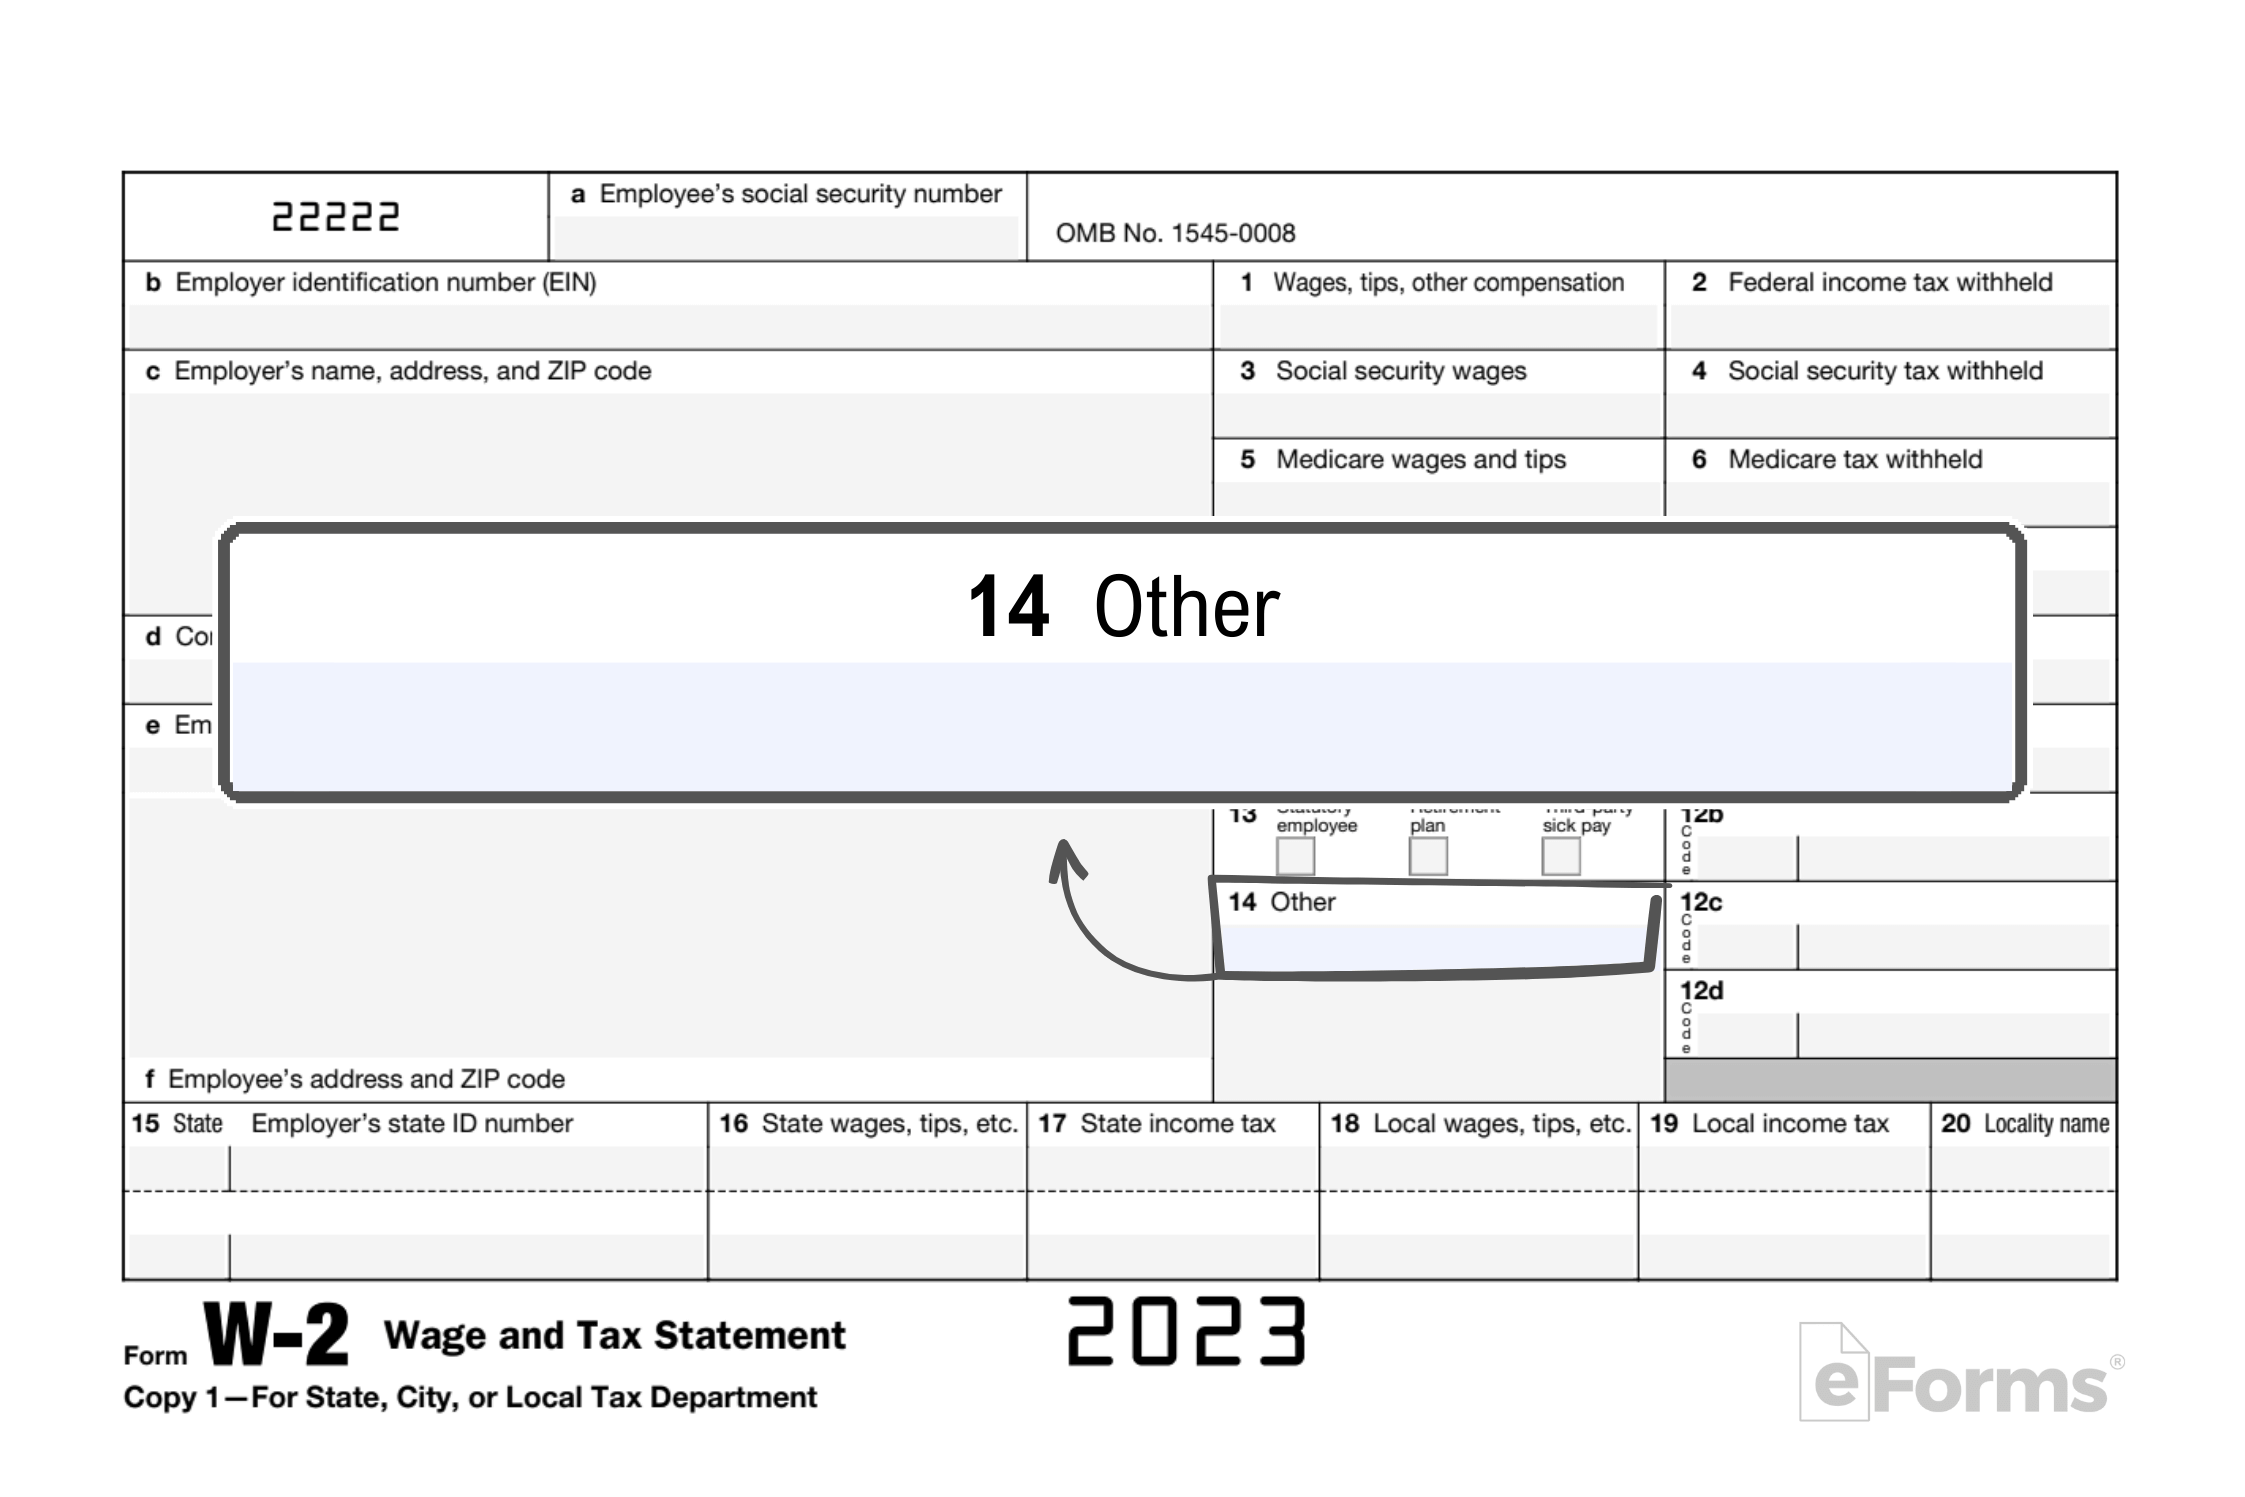 Free Irs Form W-2 | Wage And Tax Statement - Pdf – Eforms with Irs W2 Form Download